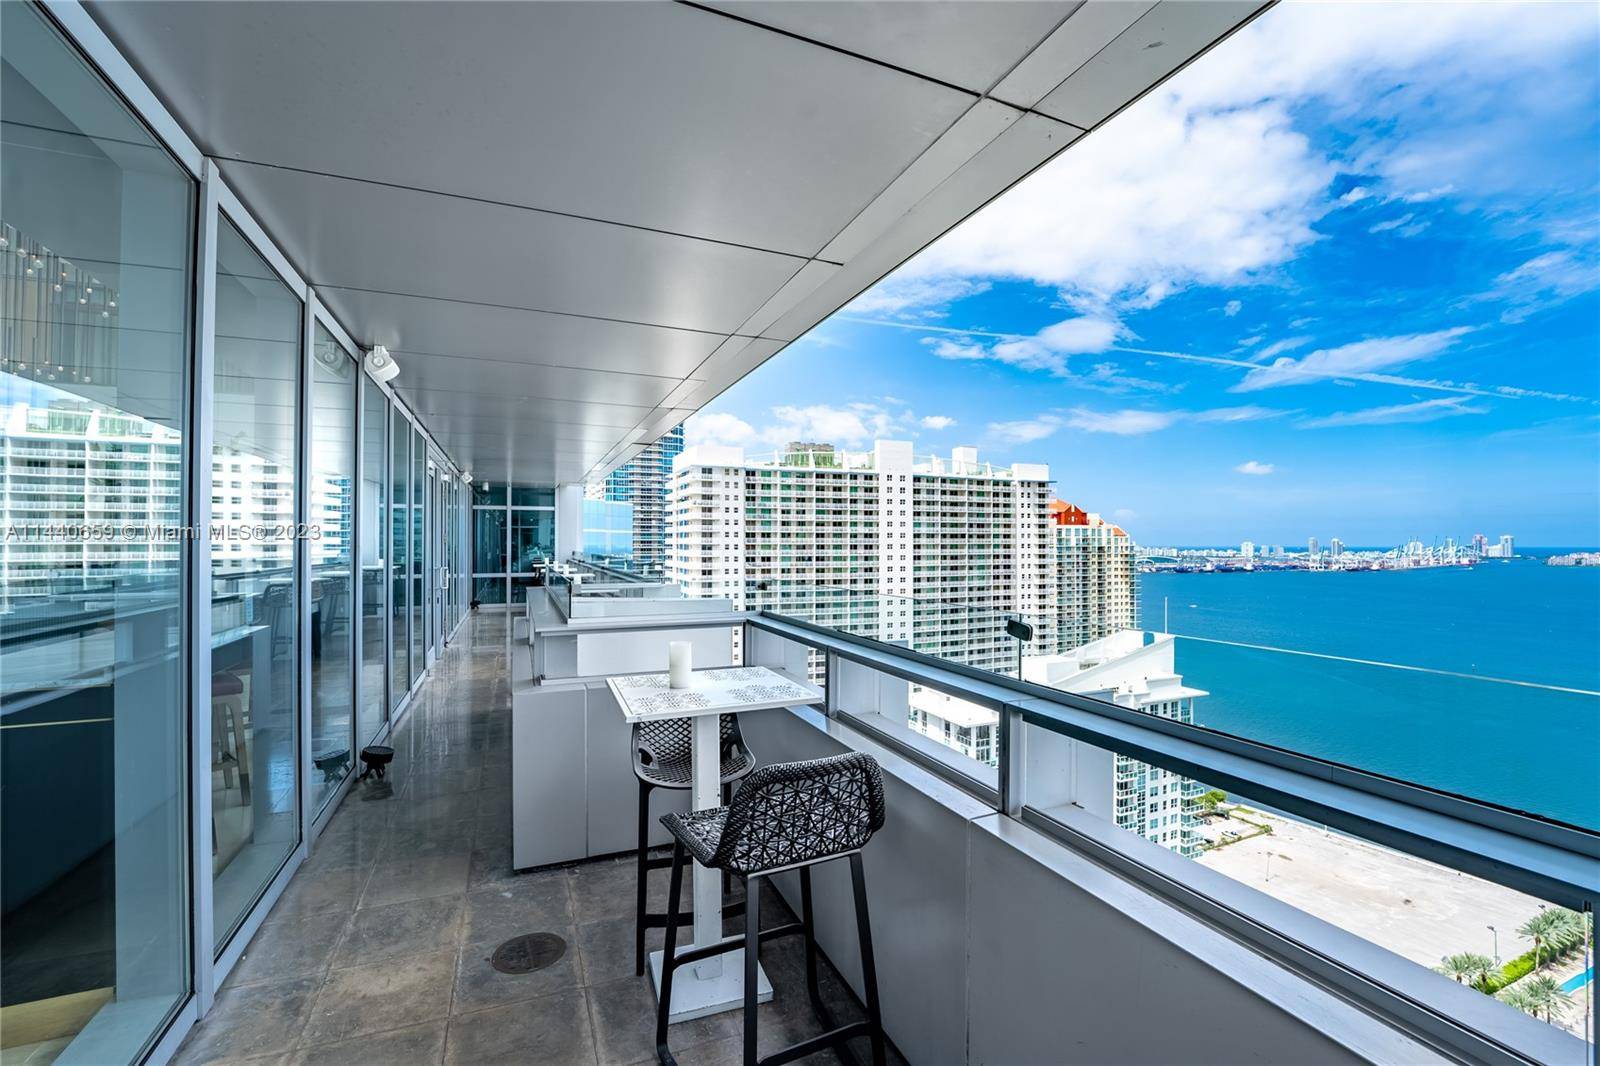 Amazing 1 1 fully furnished and equipped apartment located in the heart of Miami, Brickell financial district.